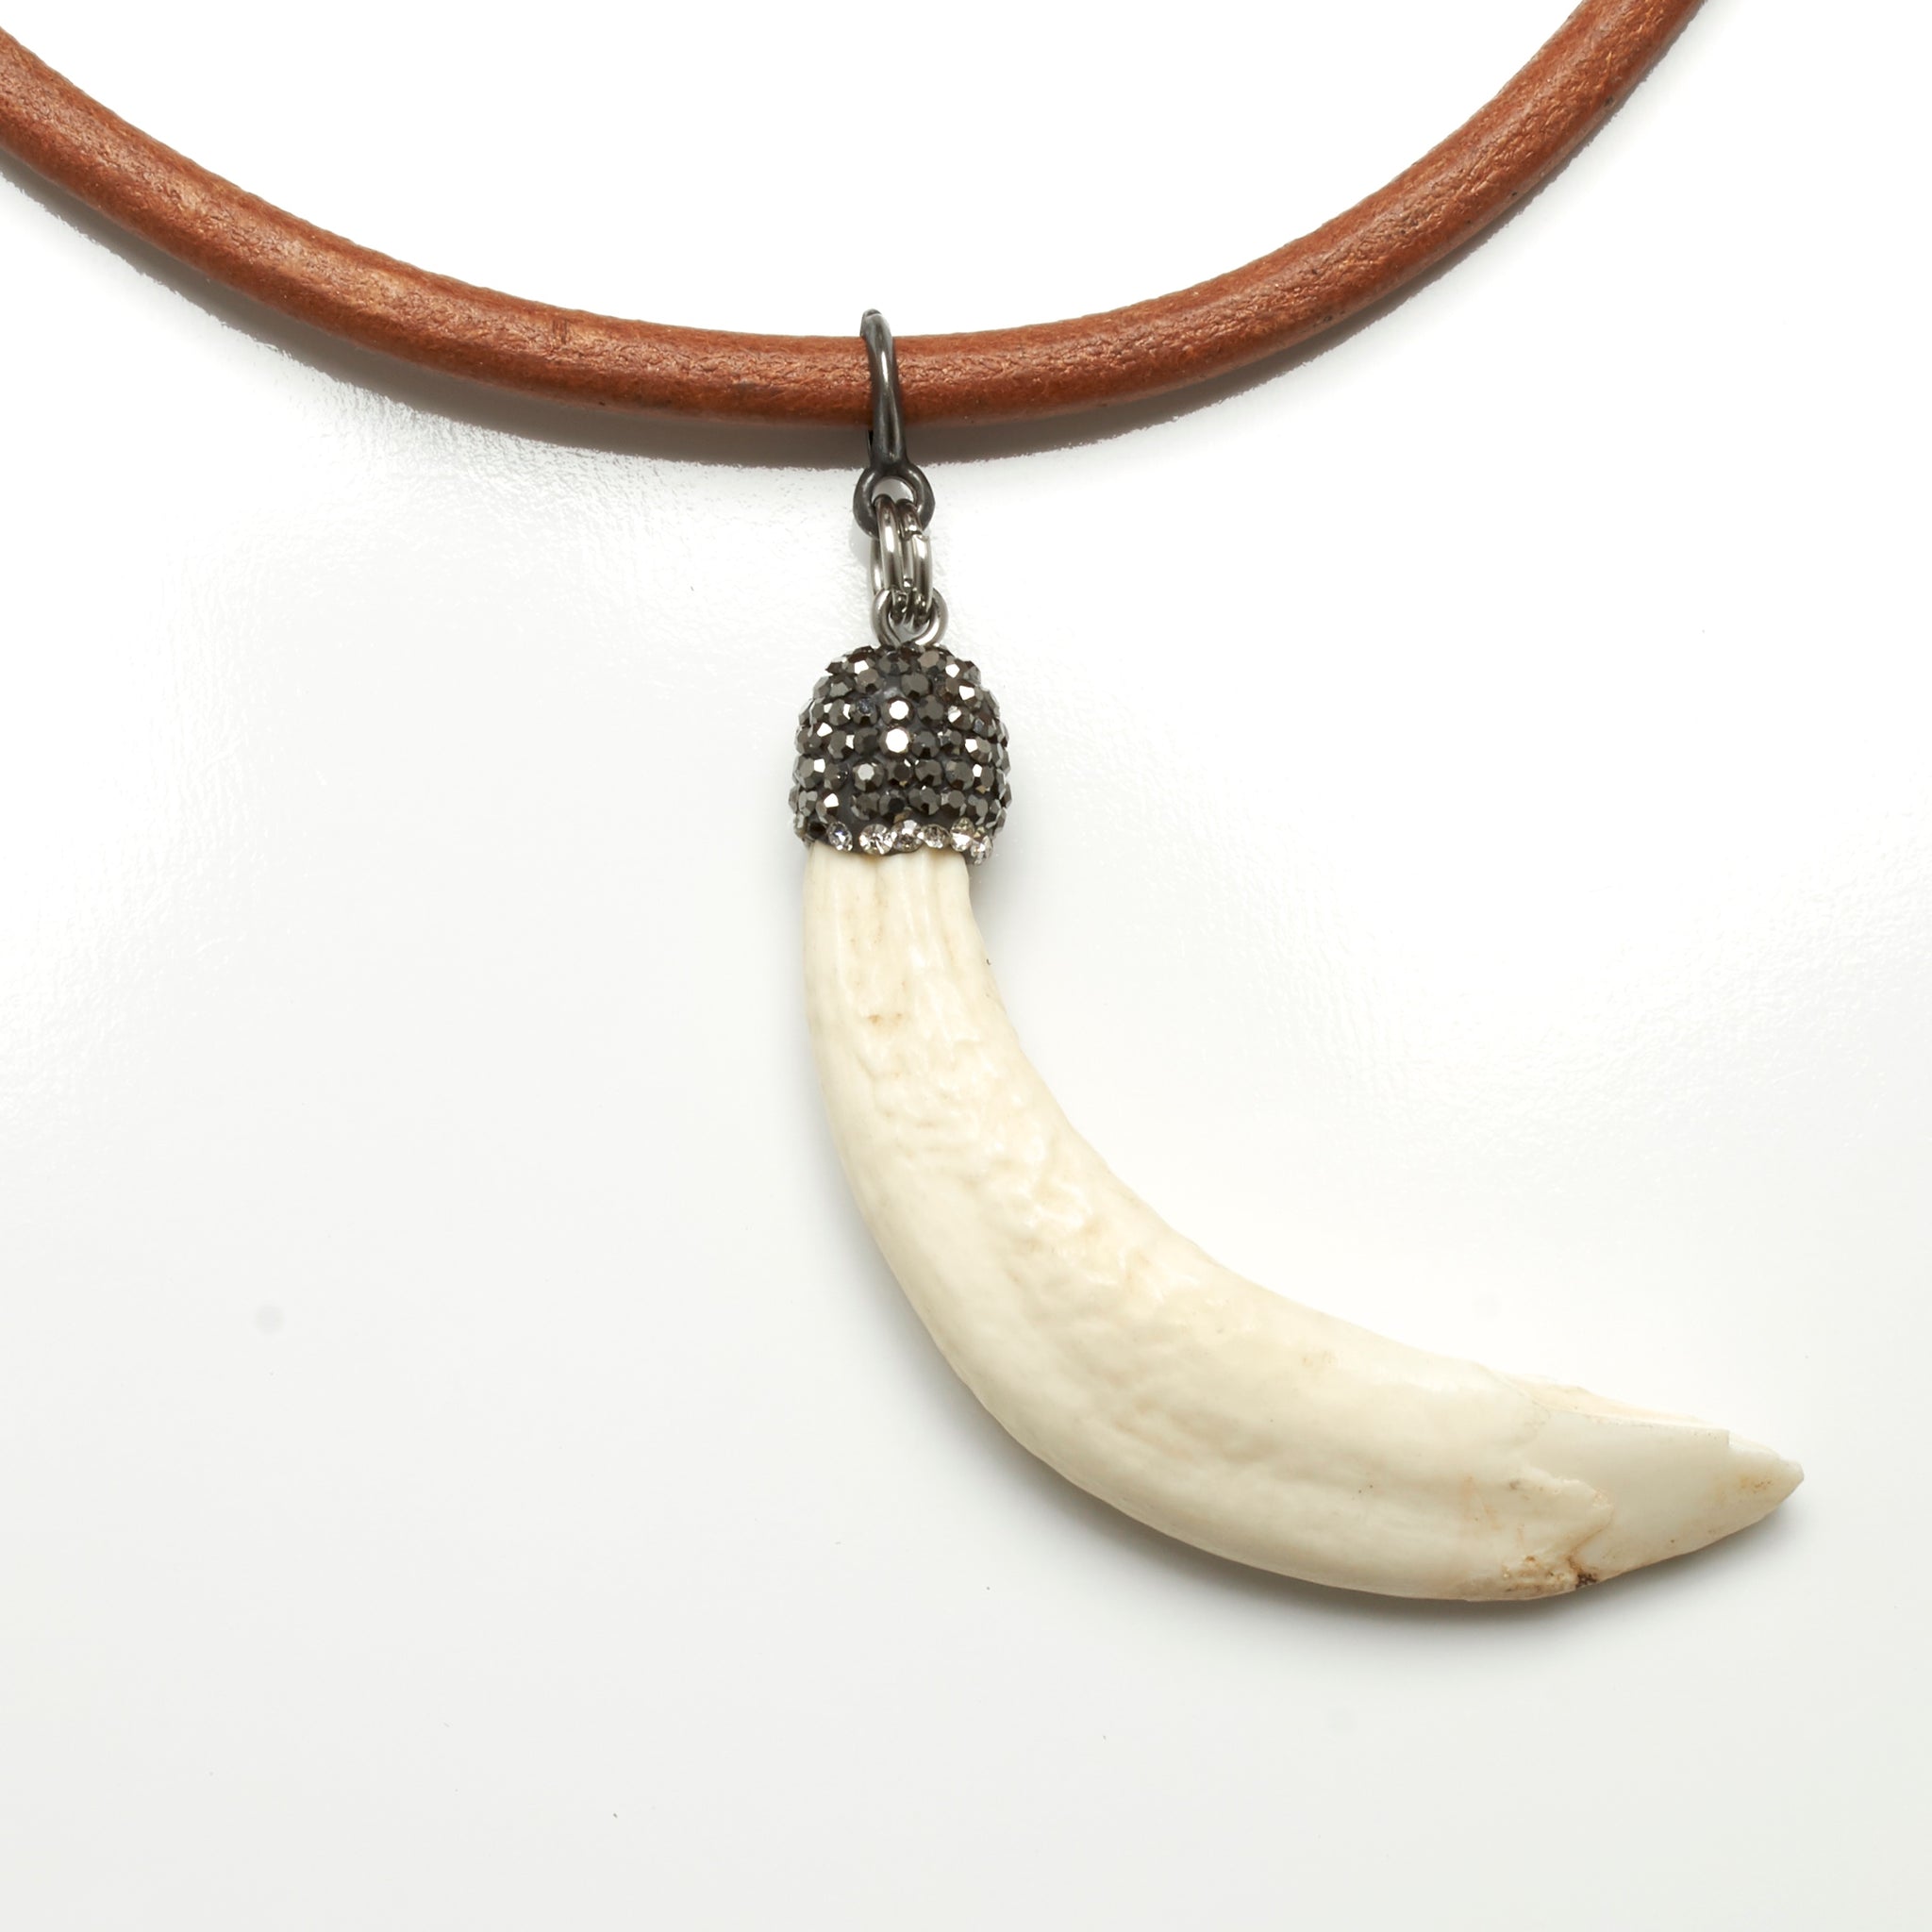 Tooth necklace consisting only of hog teeth (no tiger teeth) – Objects –  eMuseum